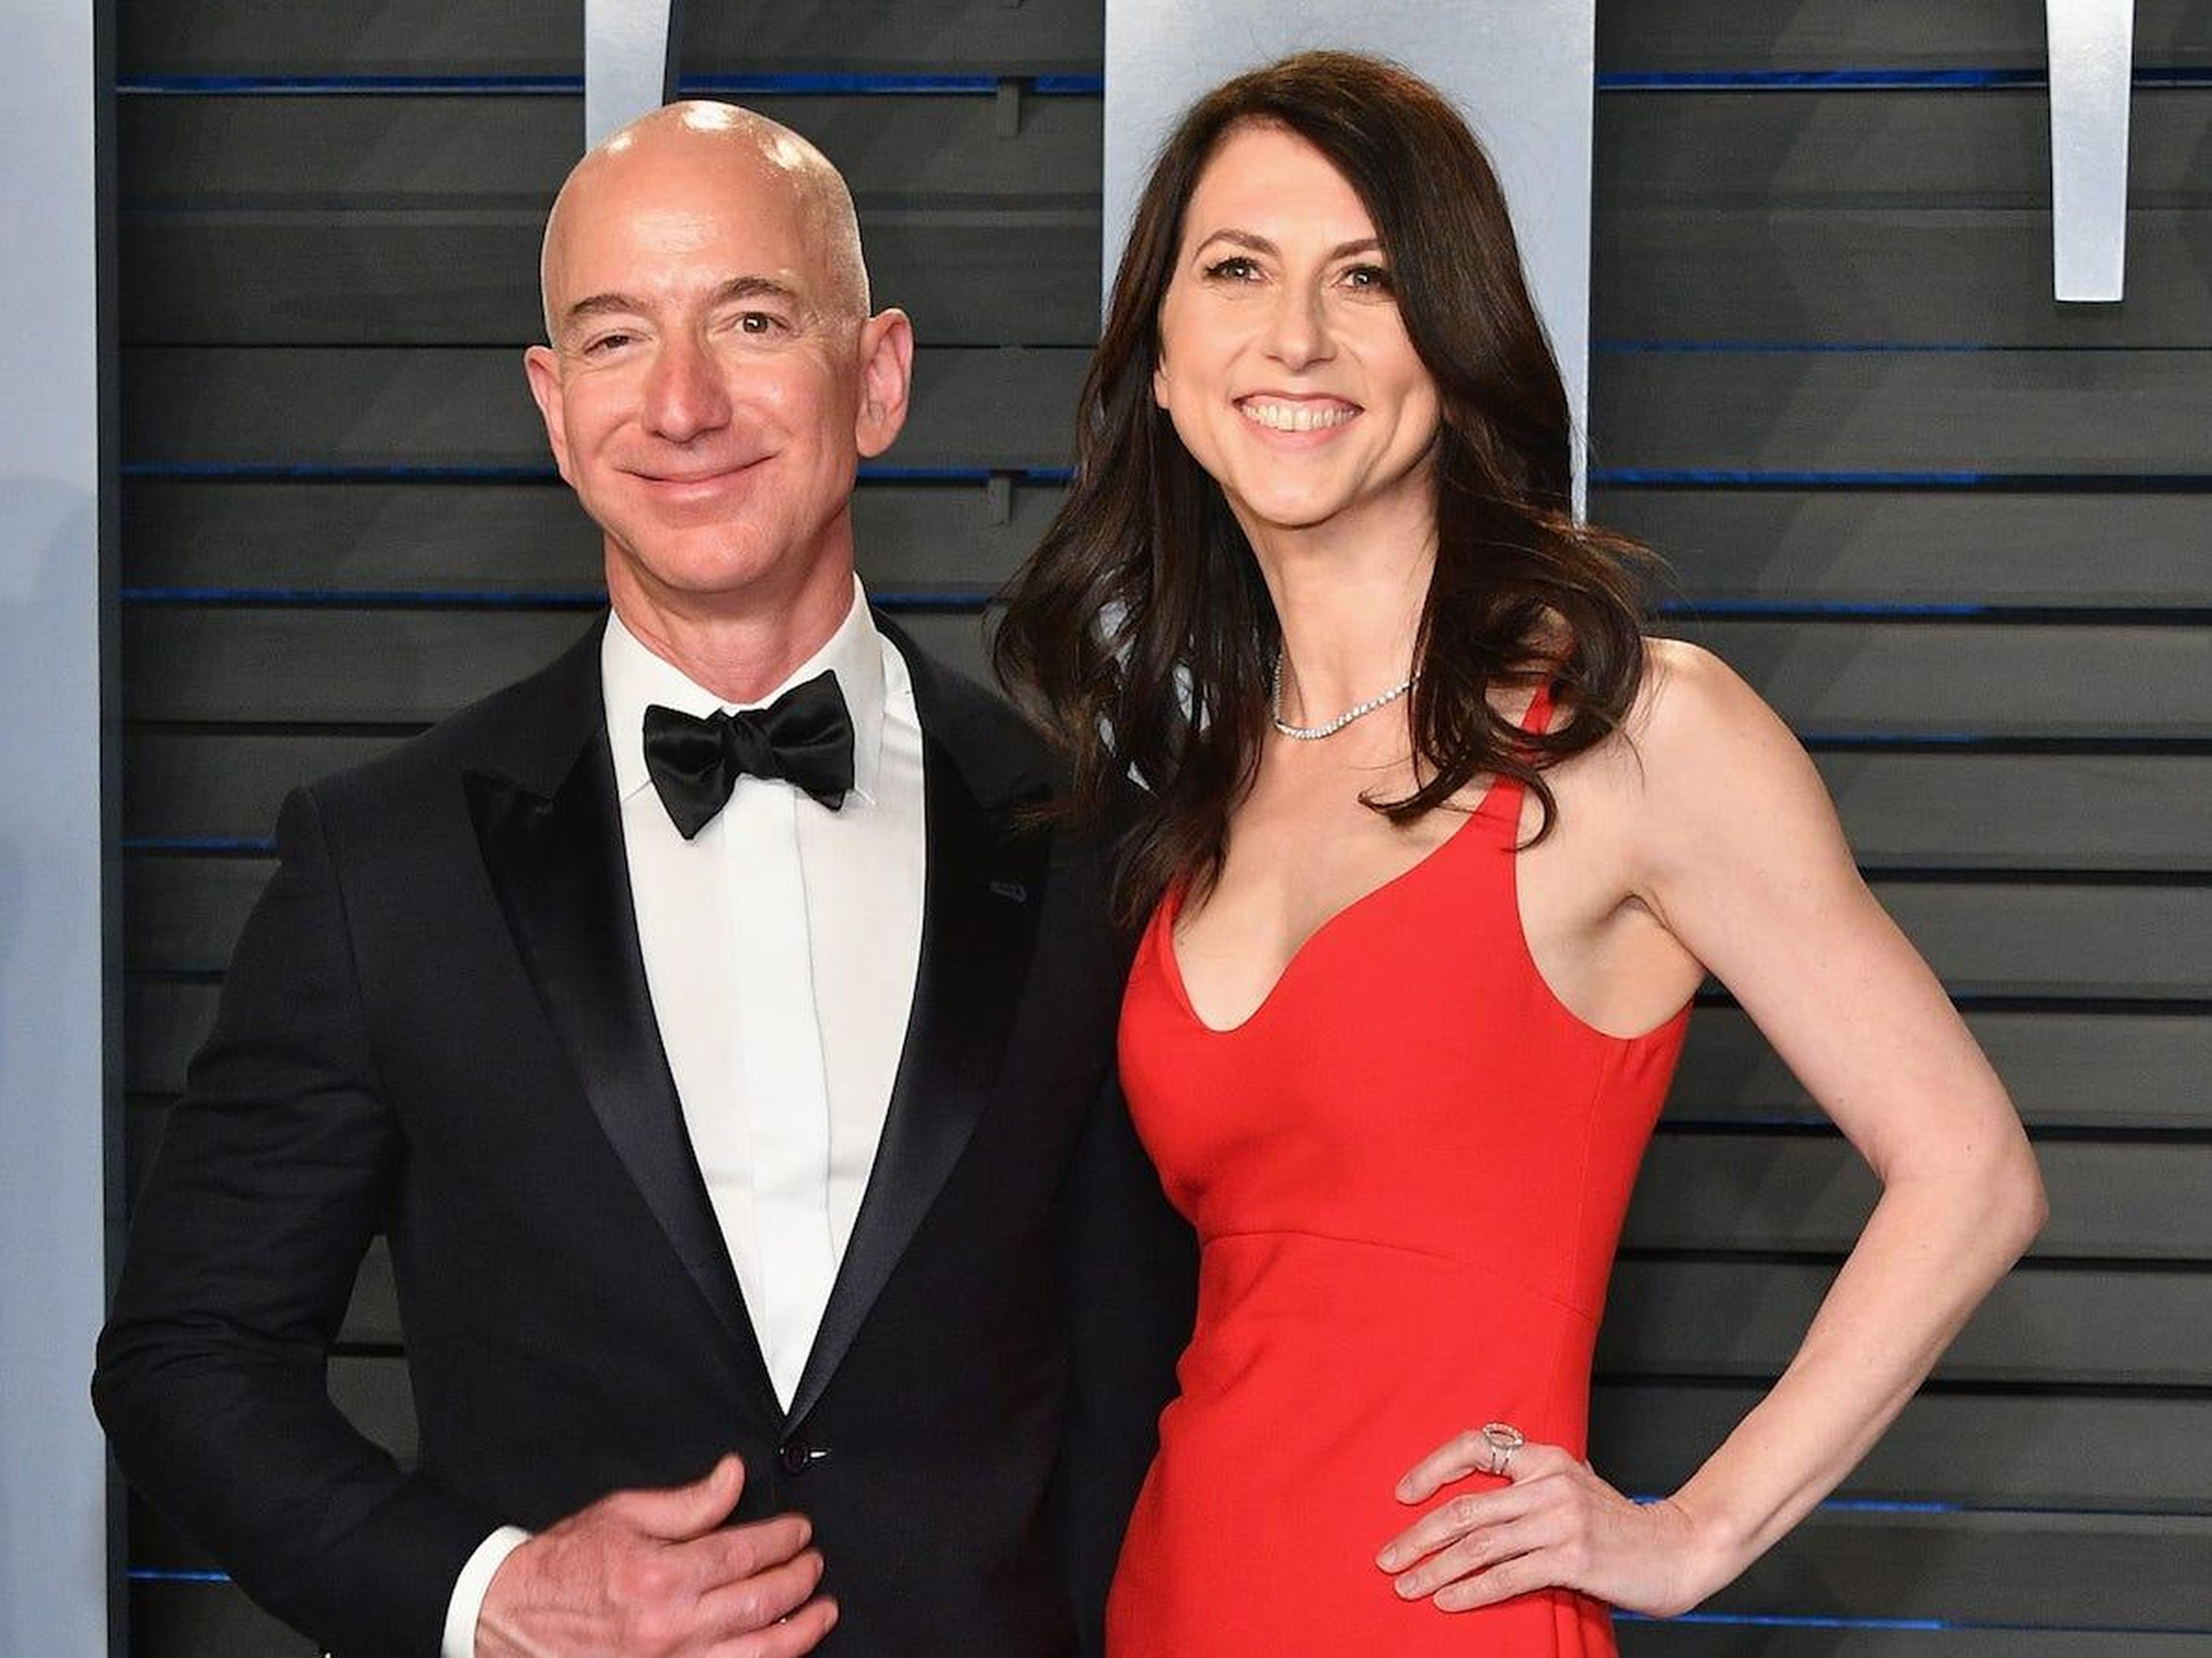 Amazon CEO Jeff Bezos has said he avoids early-morning meetings so that he has time to eat a healthy "leisurely" breakfast without any "fatty convenience foods."